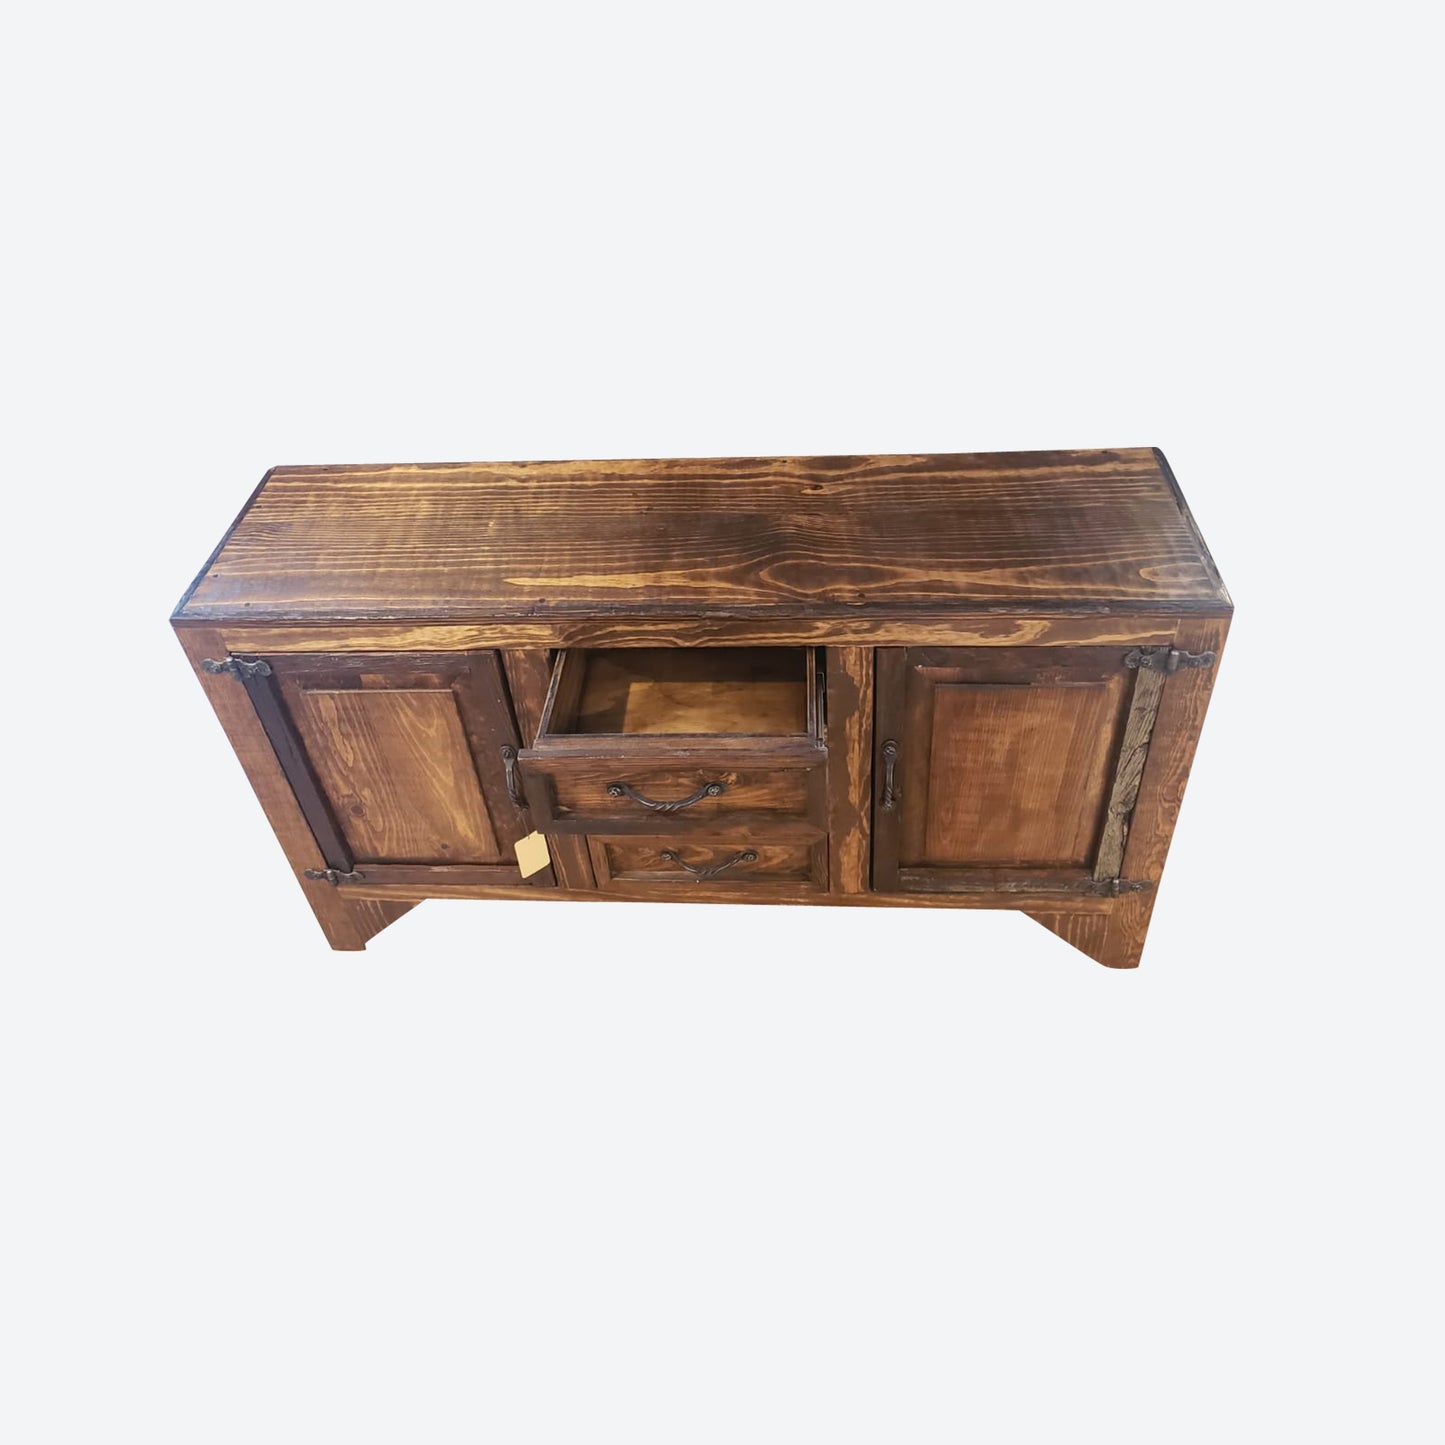 Mesquite WOOD CENTER CONSOLE TABLE WITH HAMMERED ACCENTS AND CABINETS -SK- SKU 1085